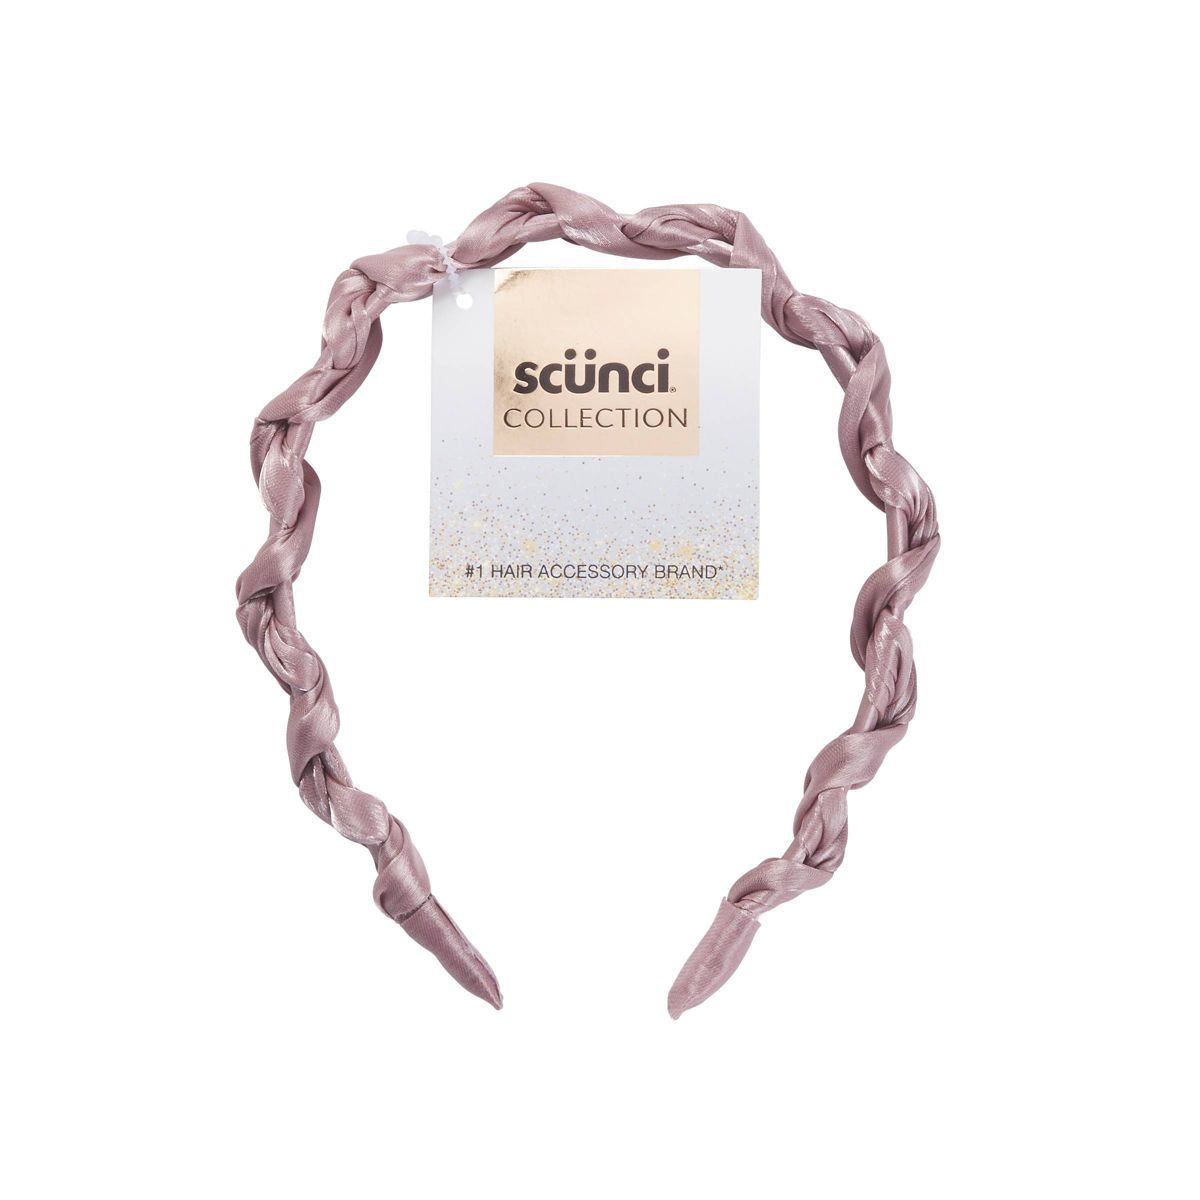 scunci Collection Braided Shimmery Headband - Pink | Target